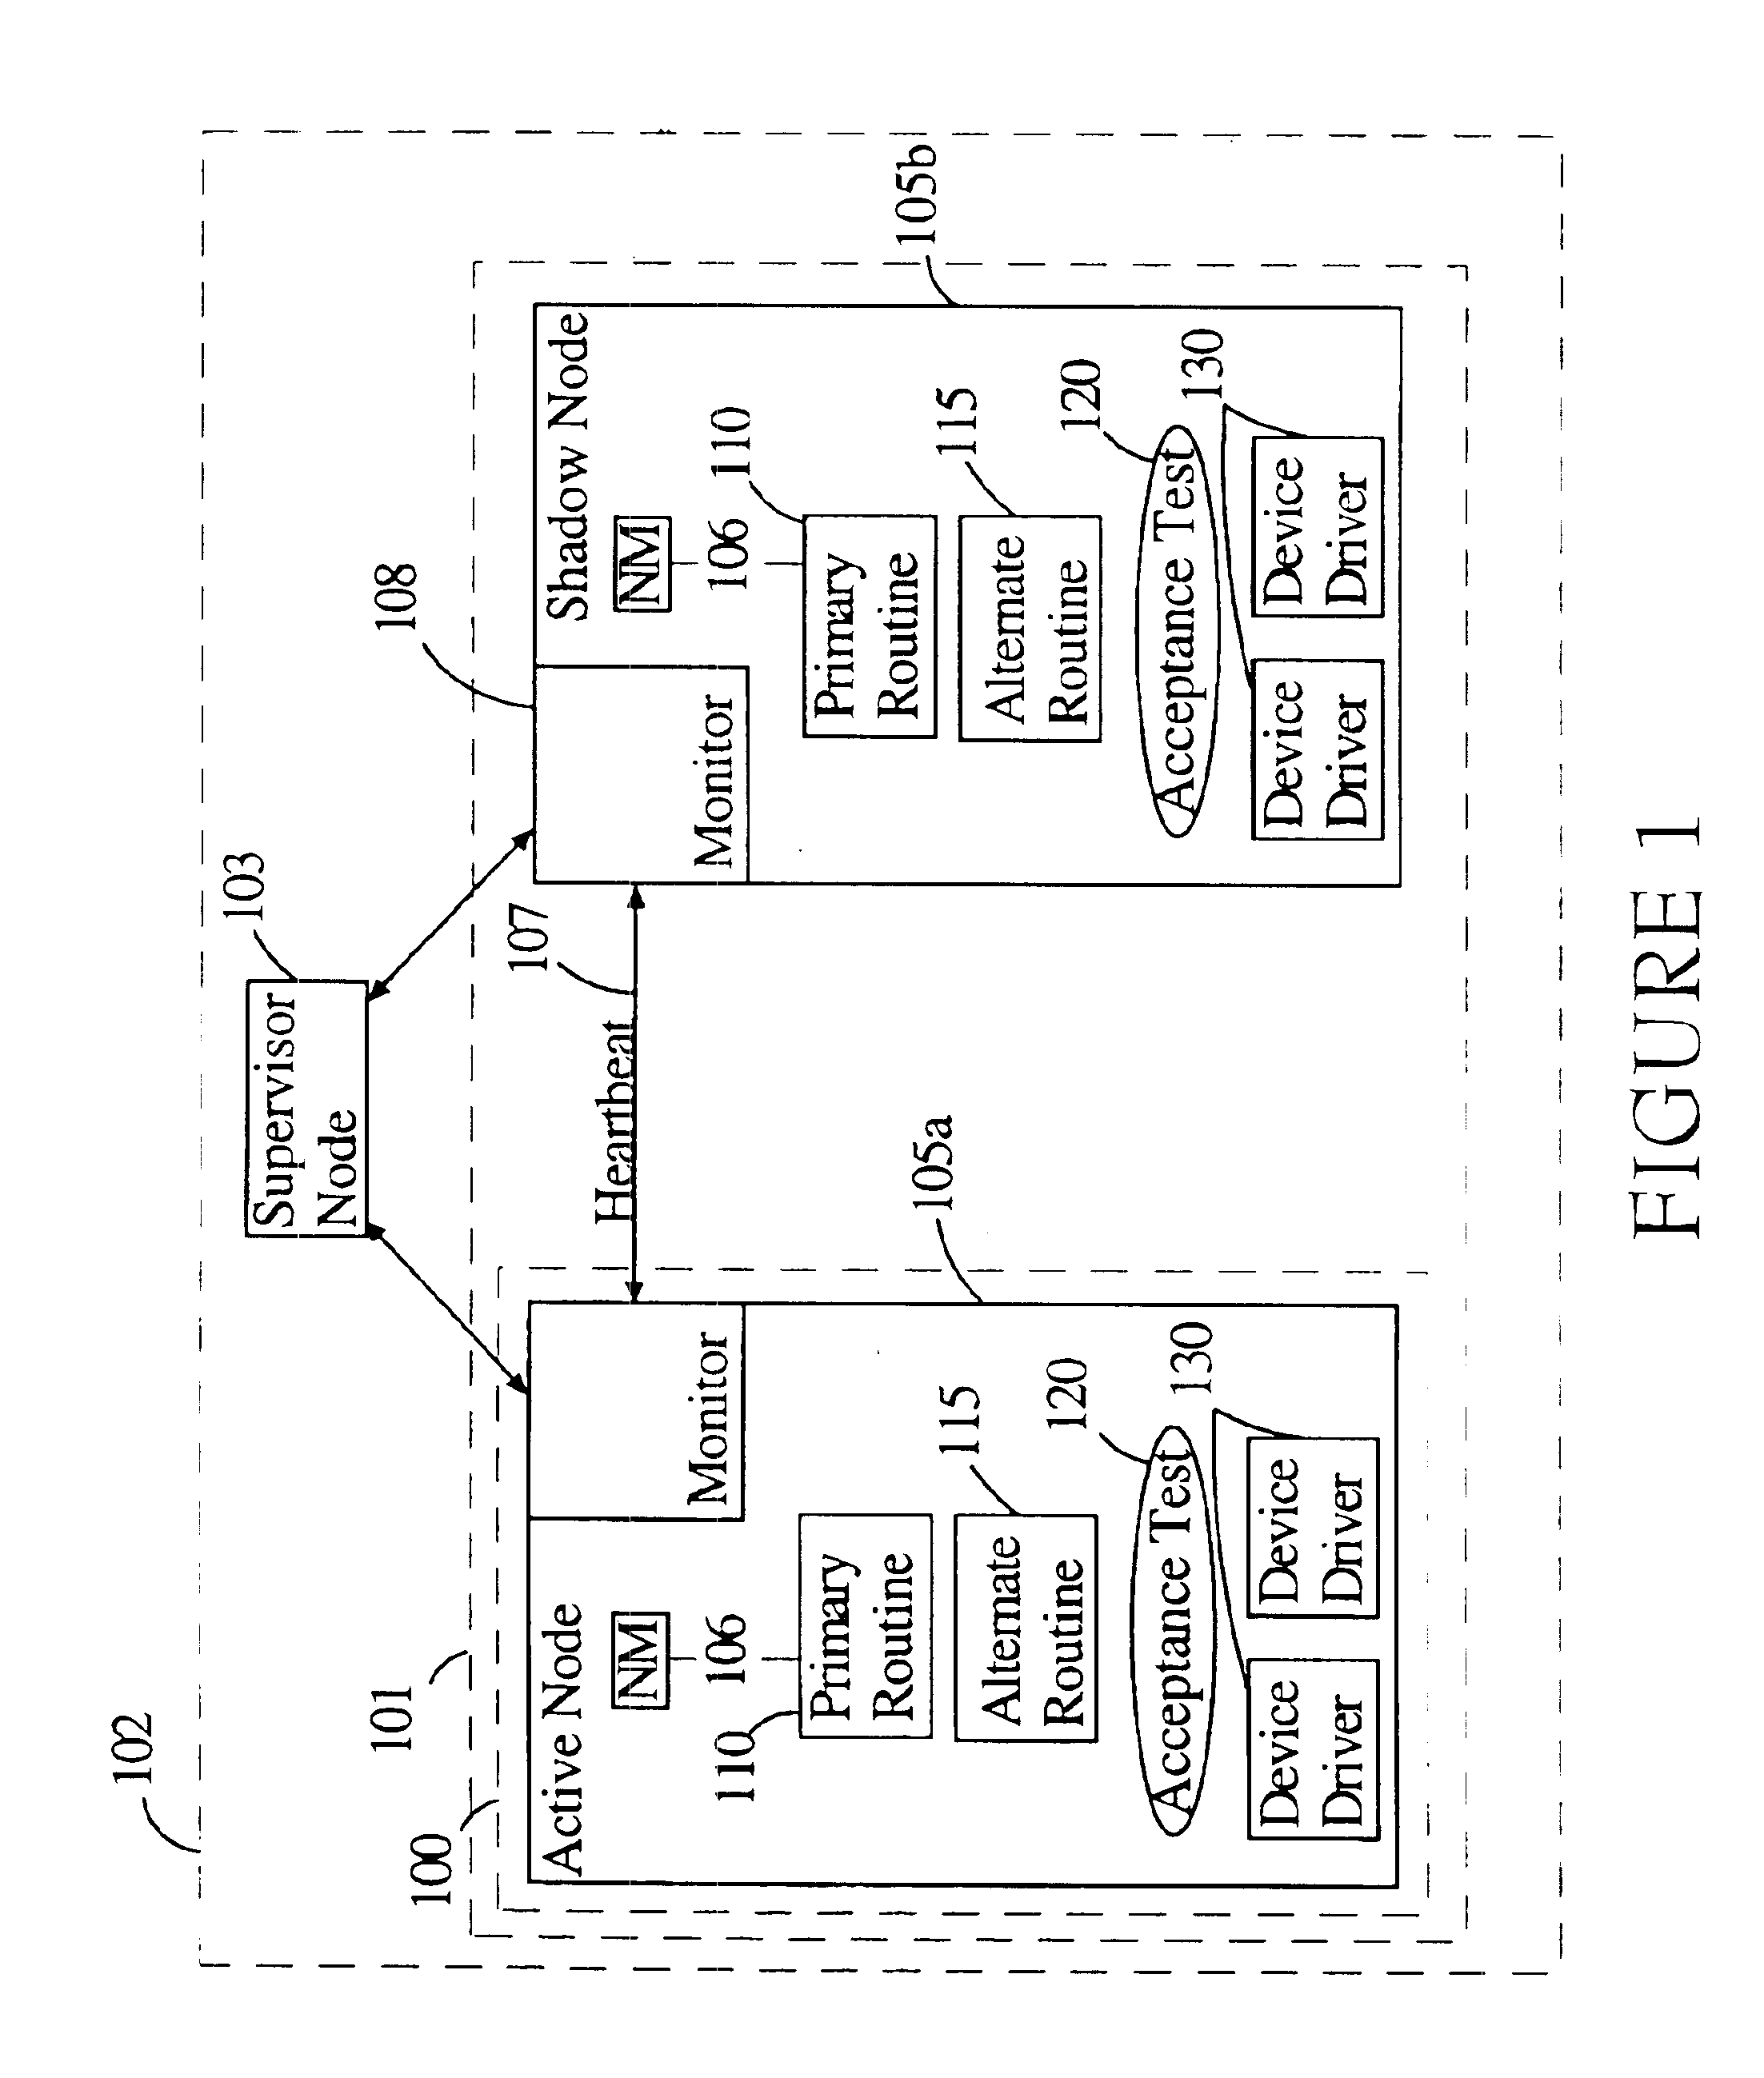 Hybrid agent-oriented object model to provide software fault tolerance between distributed processor nodes